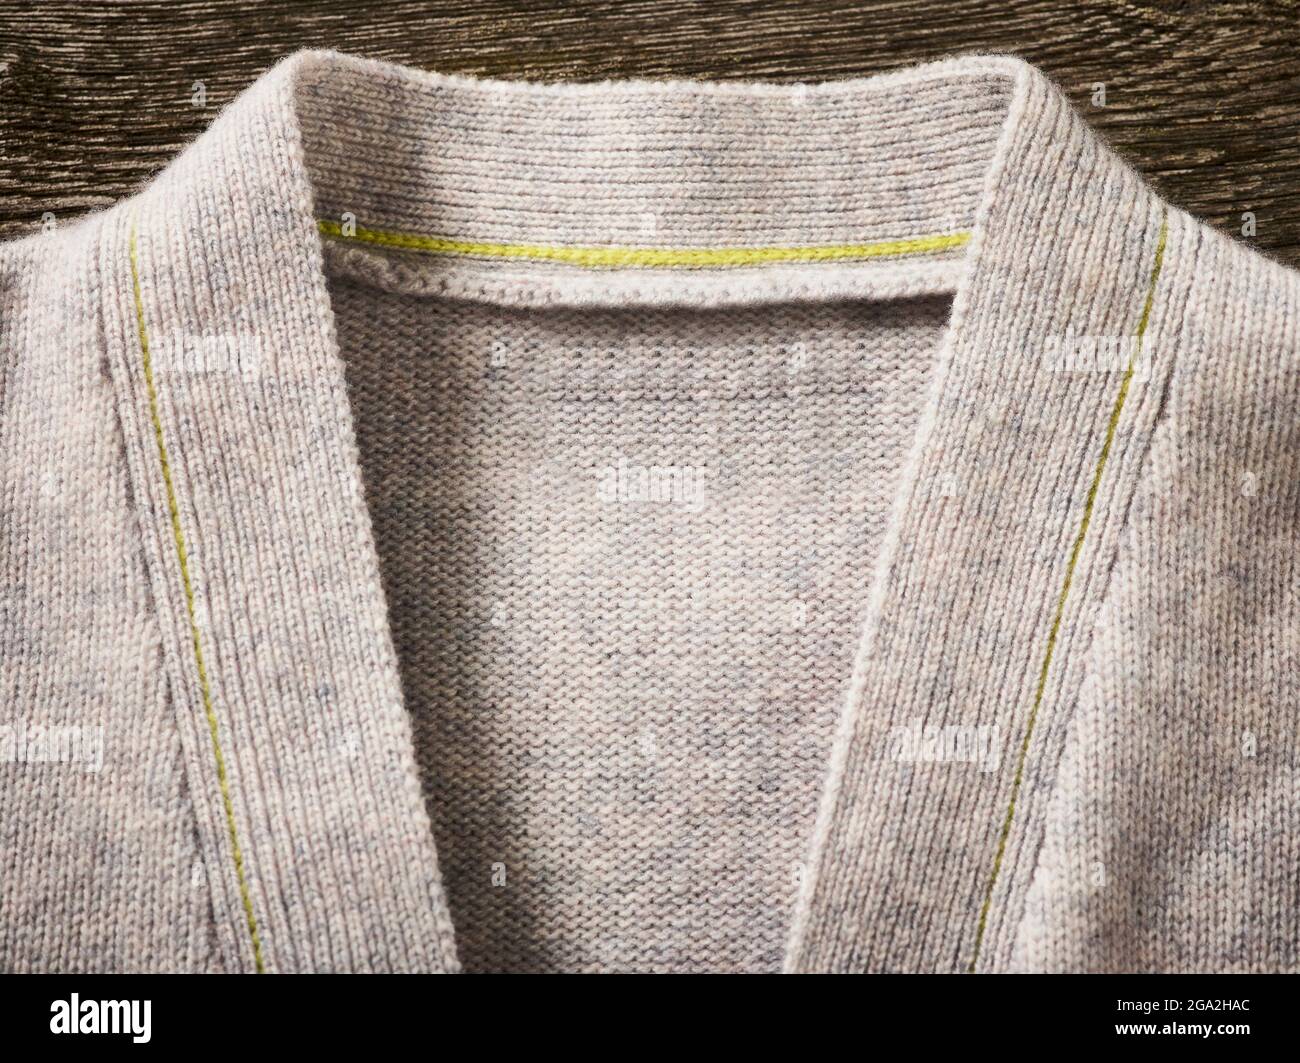 Collar and neckline of a grey cardigan sweater with yellow stitching; Studio Stock Photo